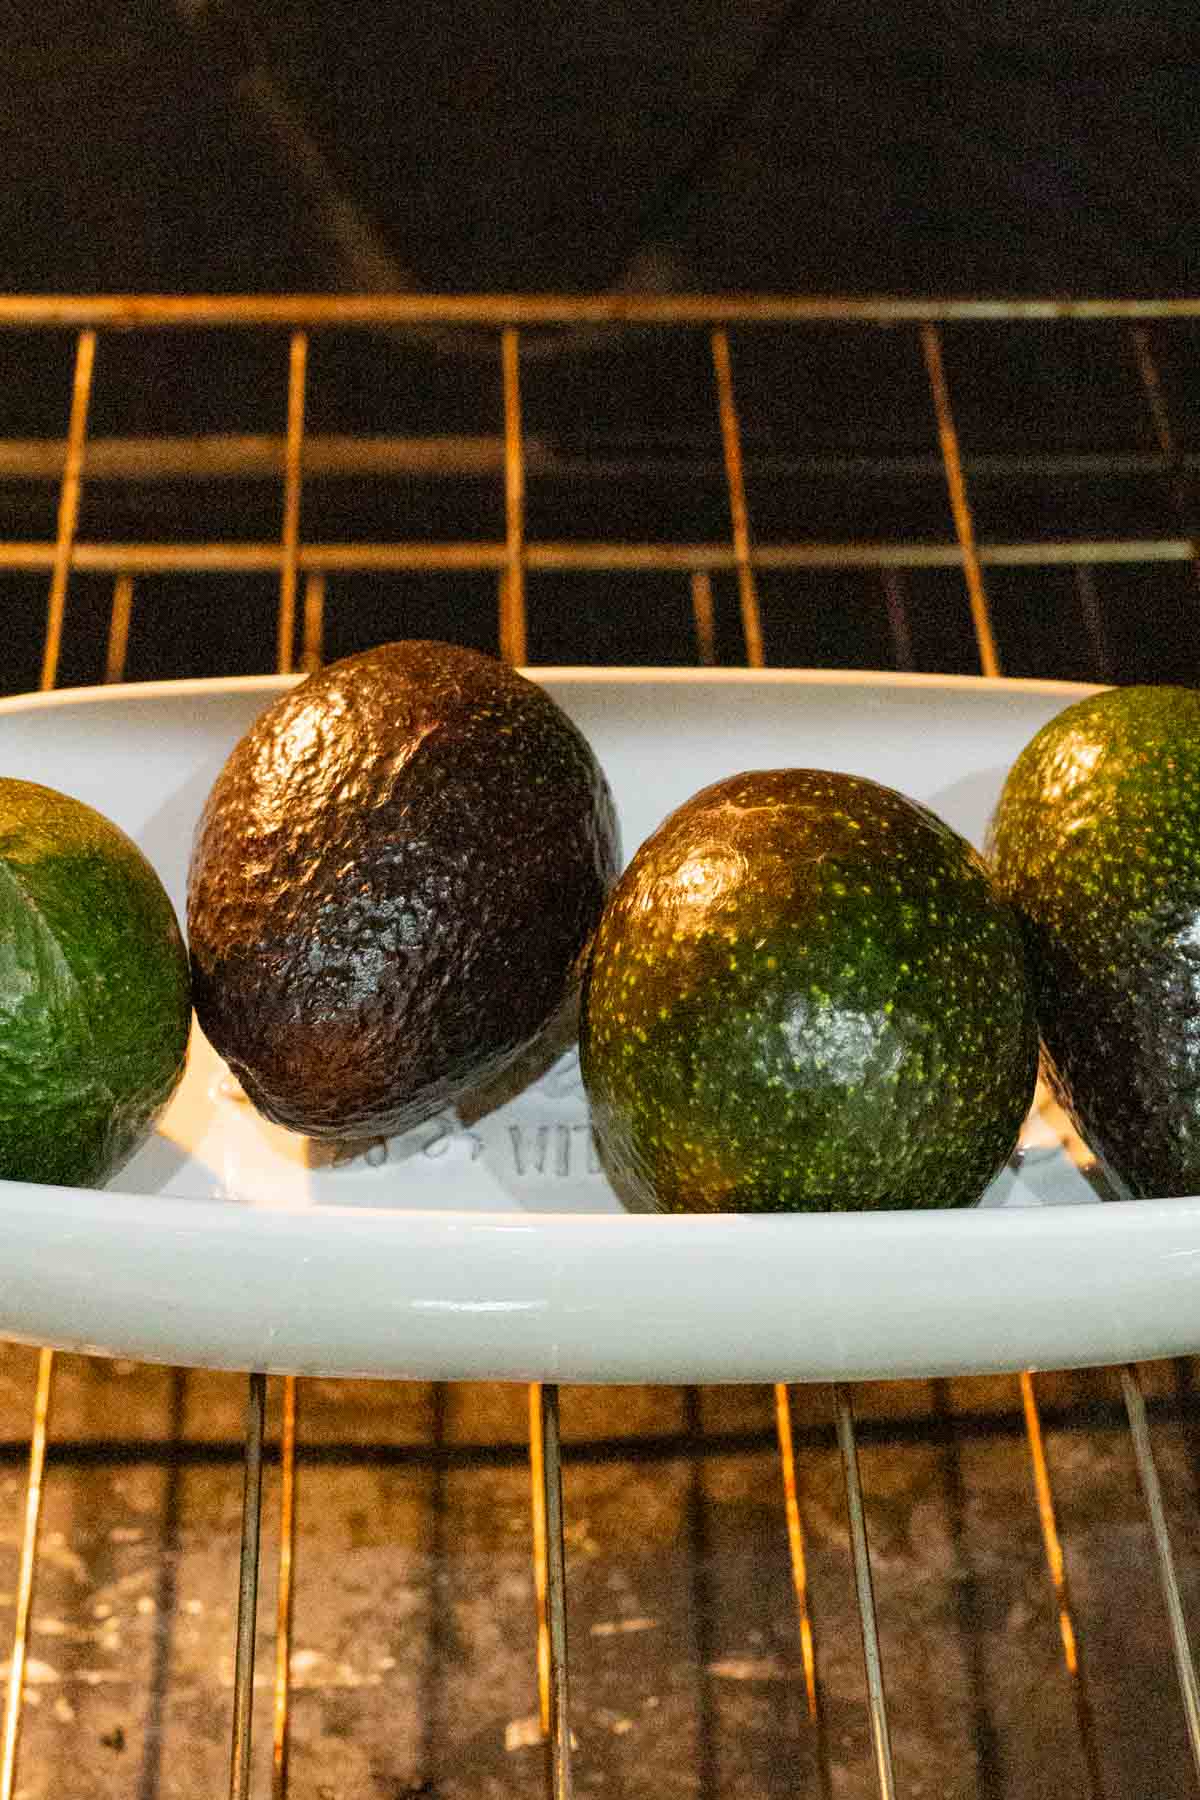 4 avocados in an oven.